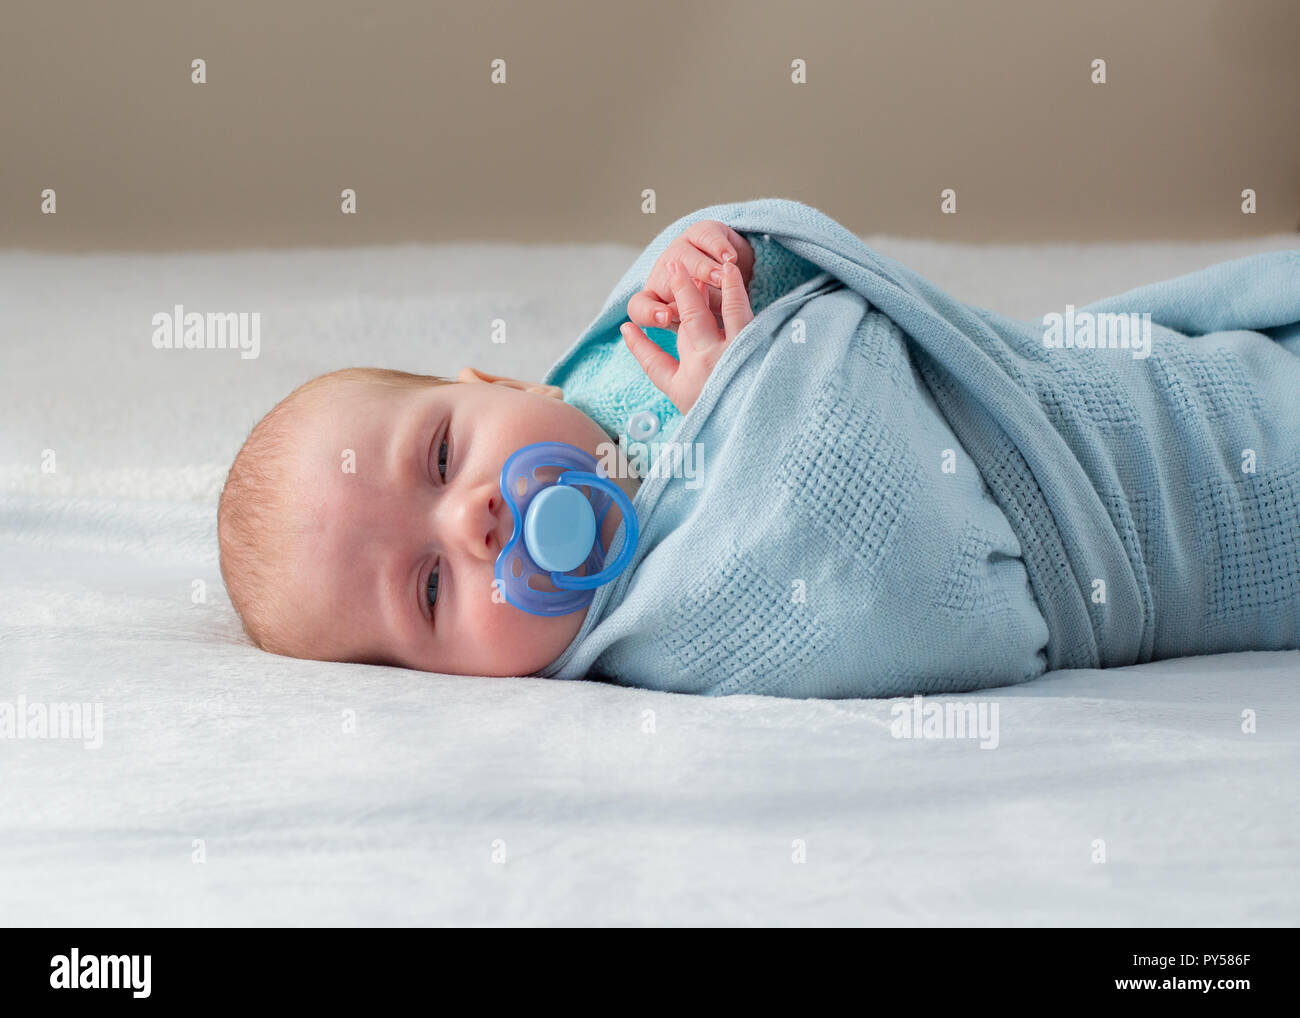 Baby laying down wrapped in a blue blanket facing the camera with sleepy eyes and pacifier in his mouth. Stock Photo